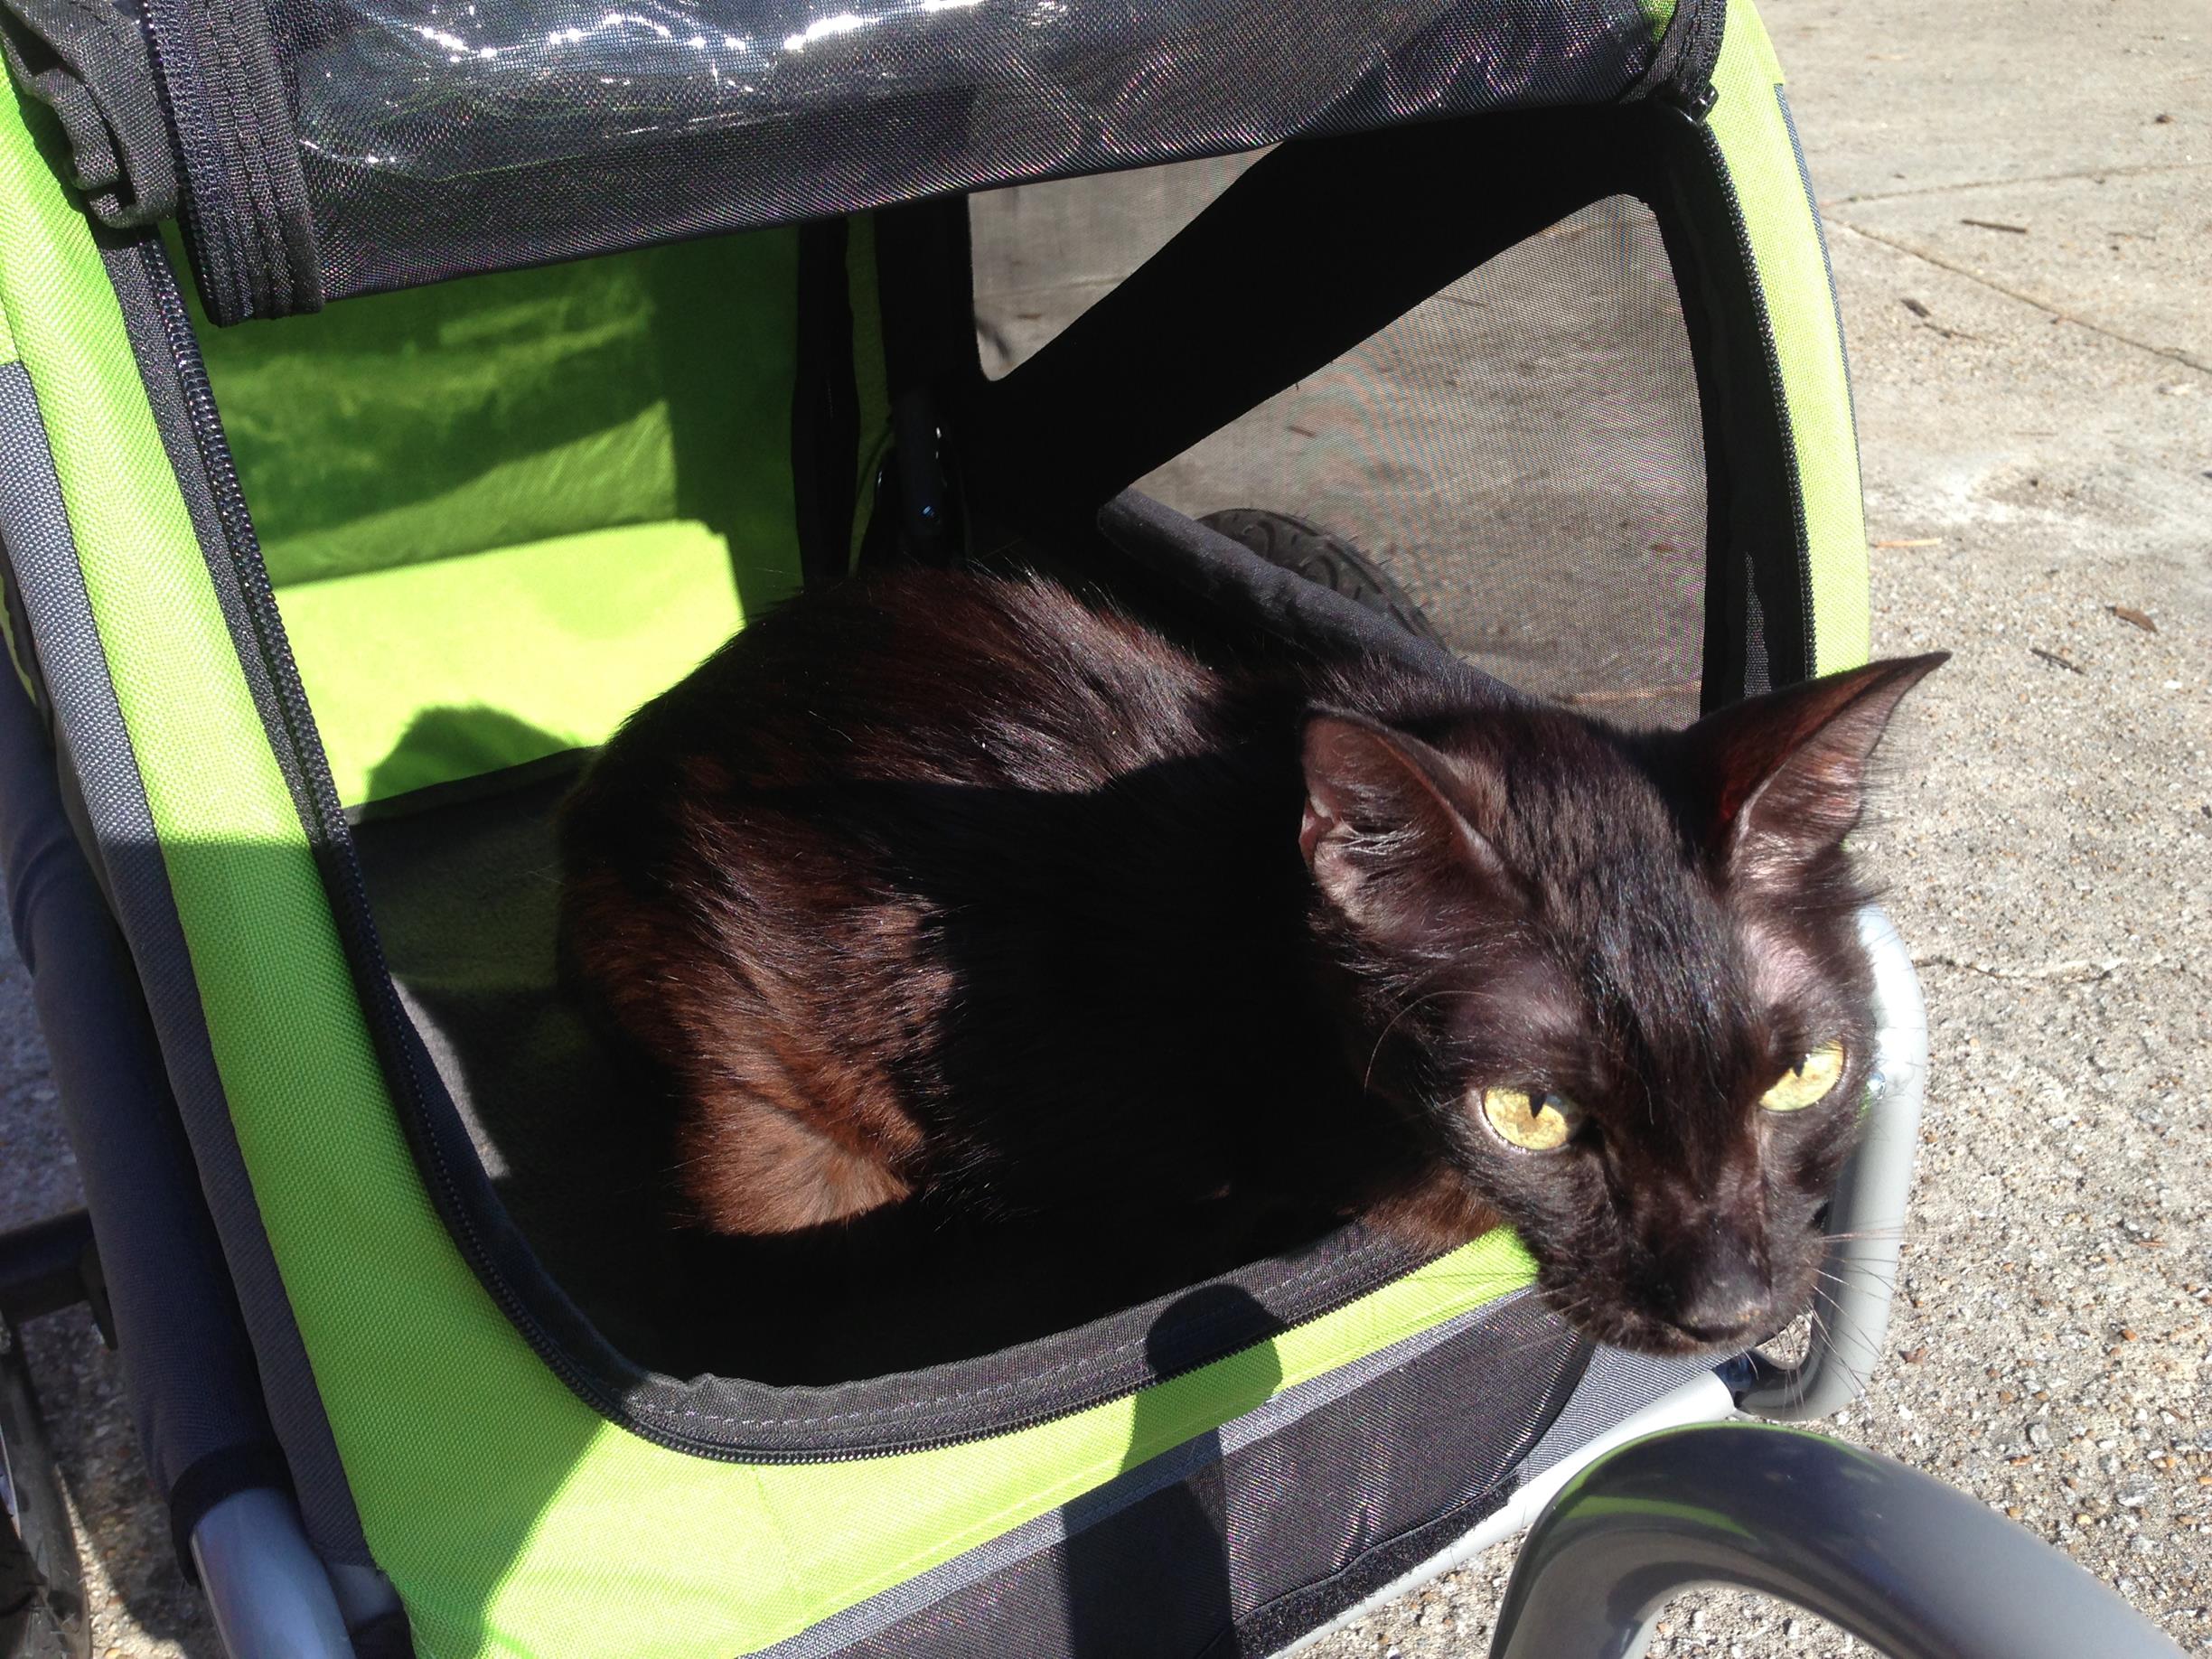 Strollers are great for senior cat enrichment. 